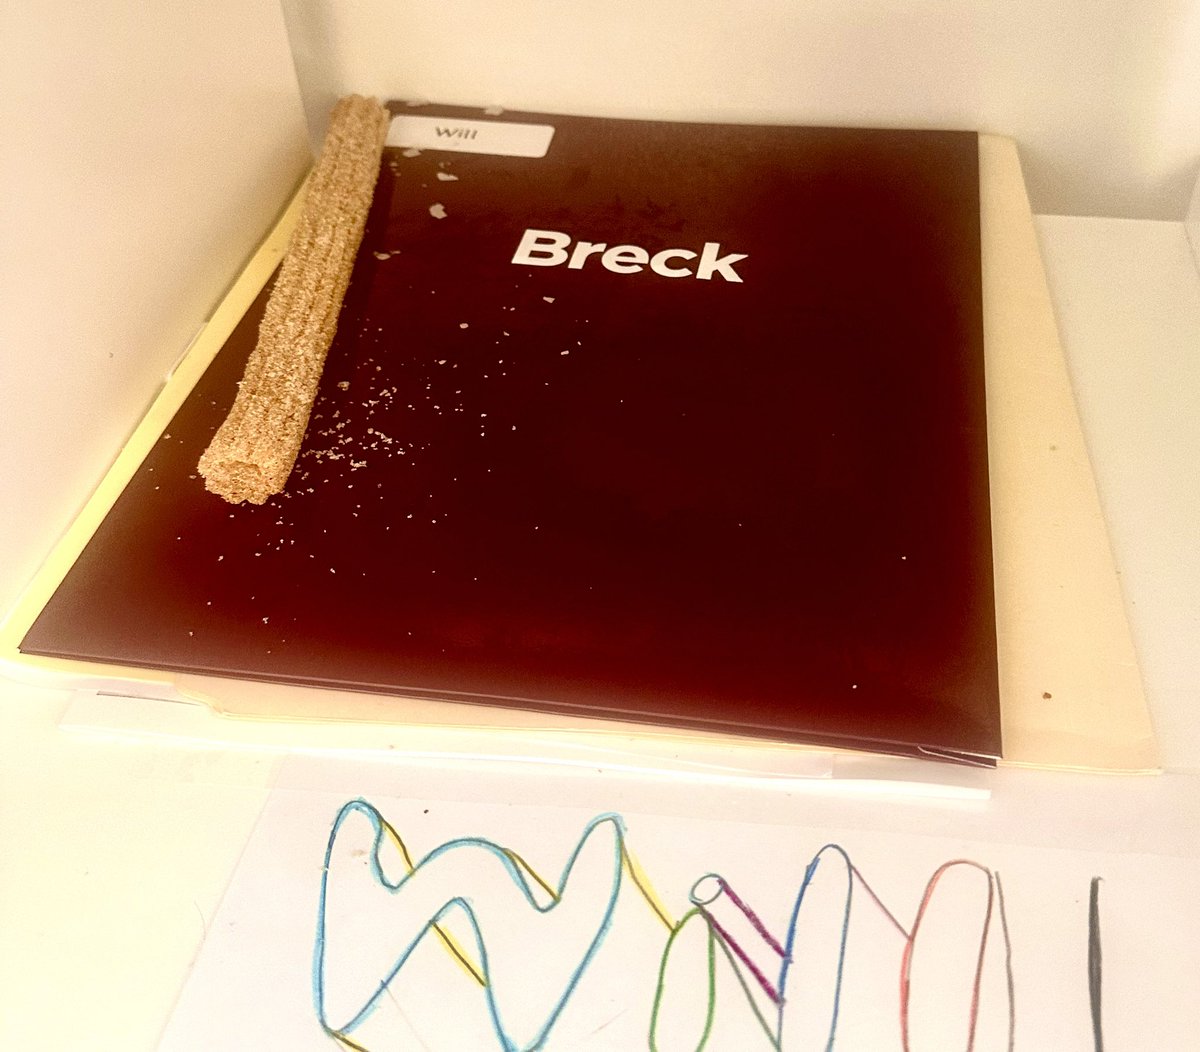 If I had any doubt, my visit to Breck School in Minnesota only confirmed that middle schoolers are the exact same everywhere. Exhibit A: This kid left a random churro in his cubby.